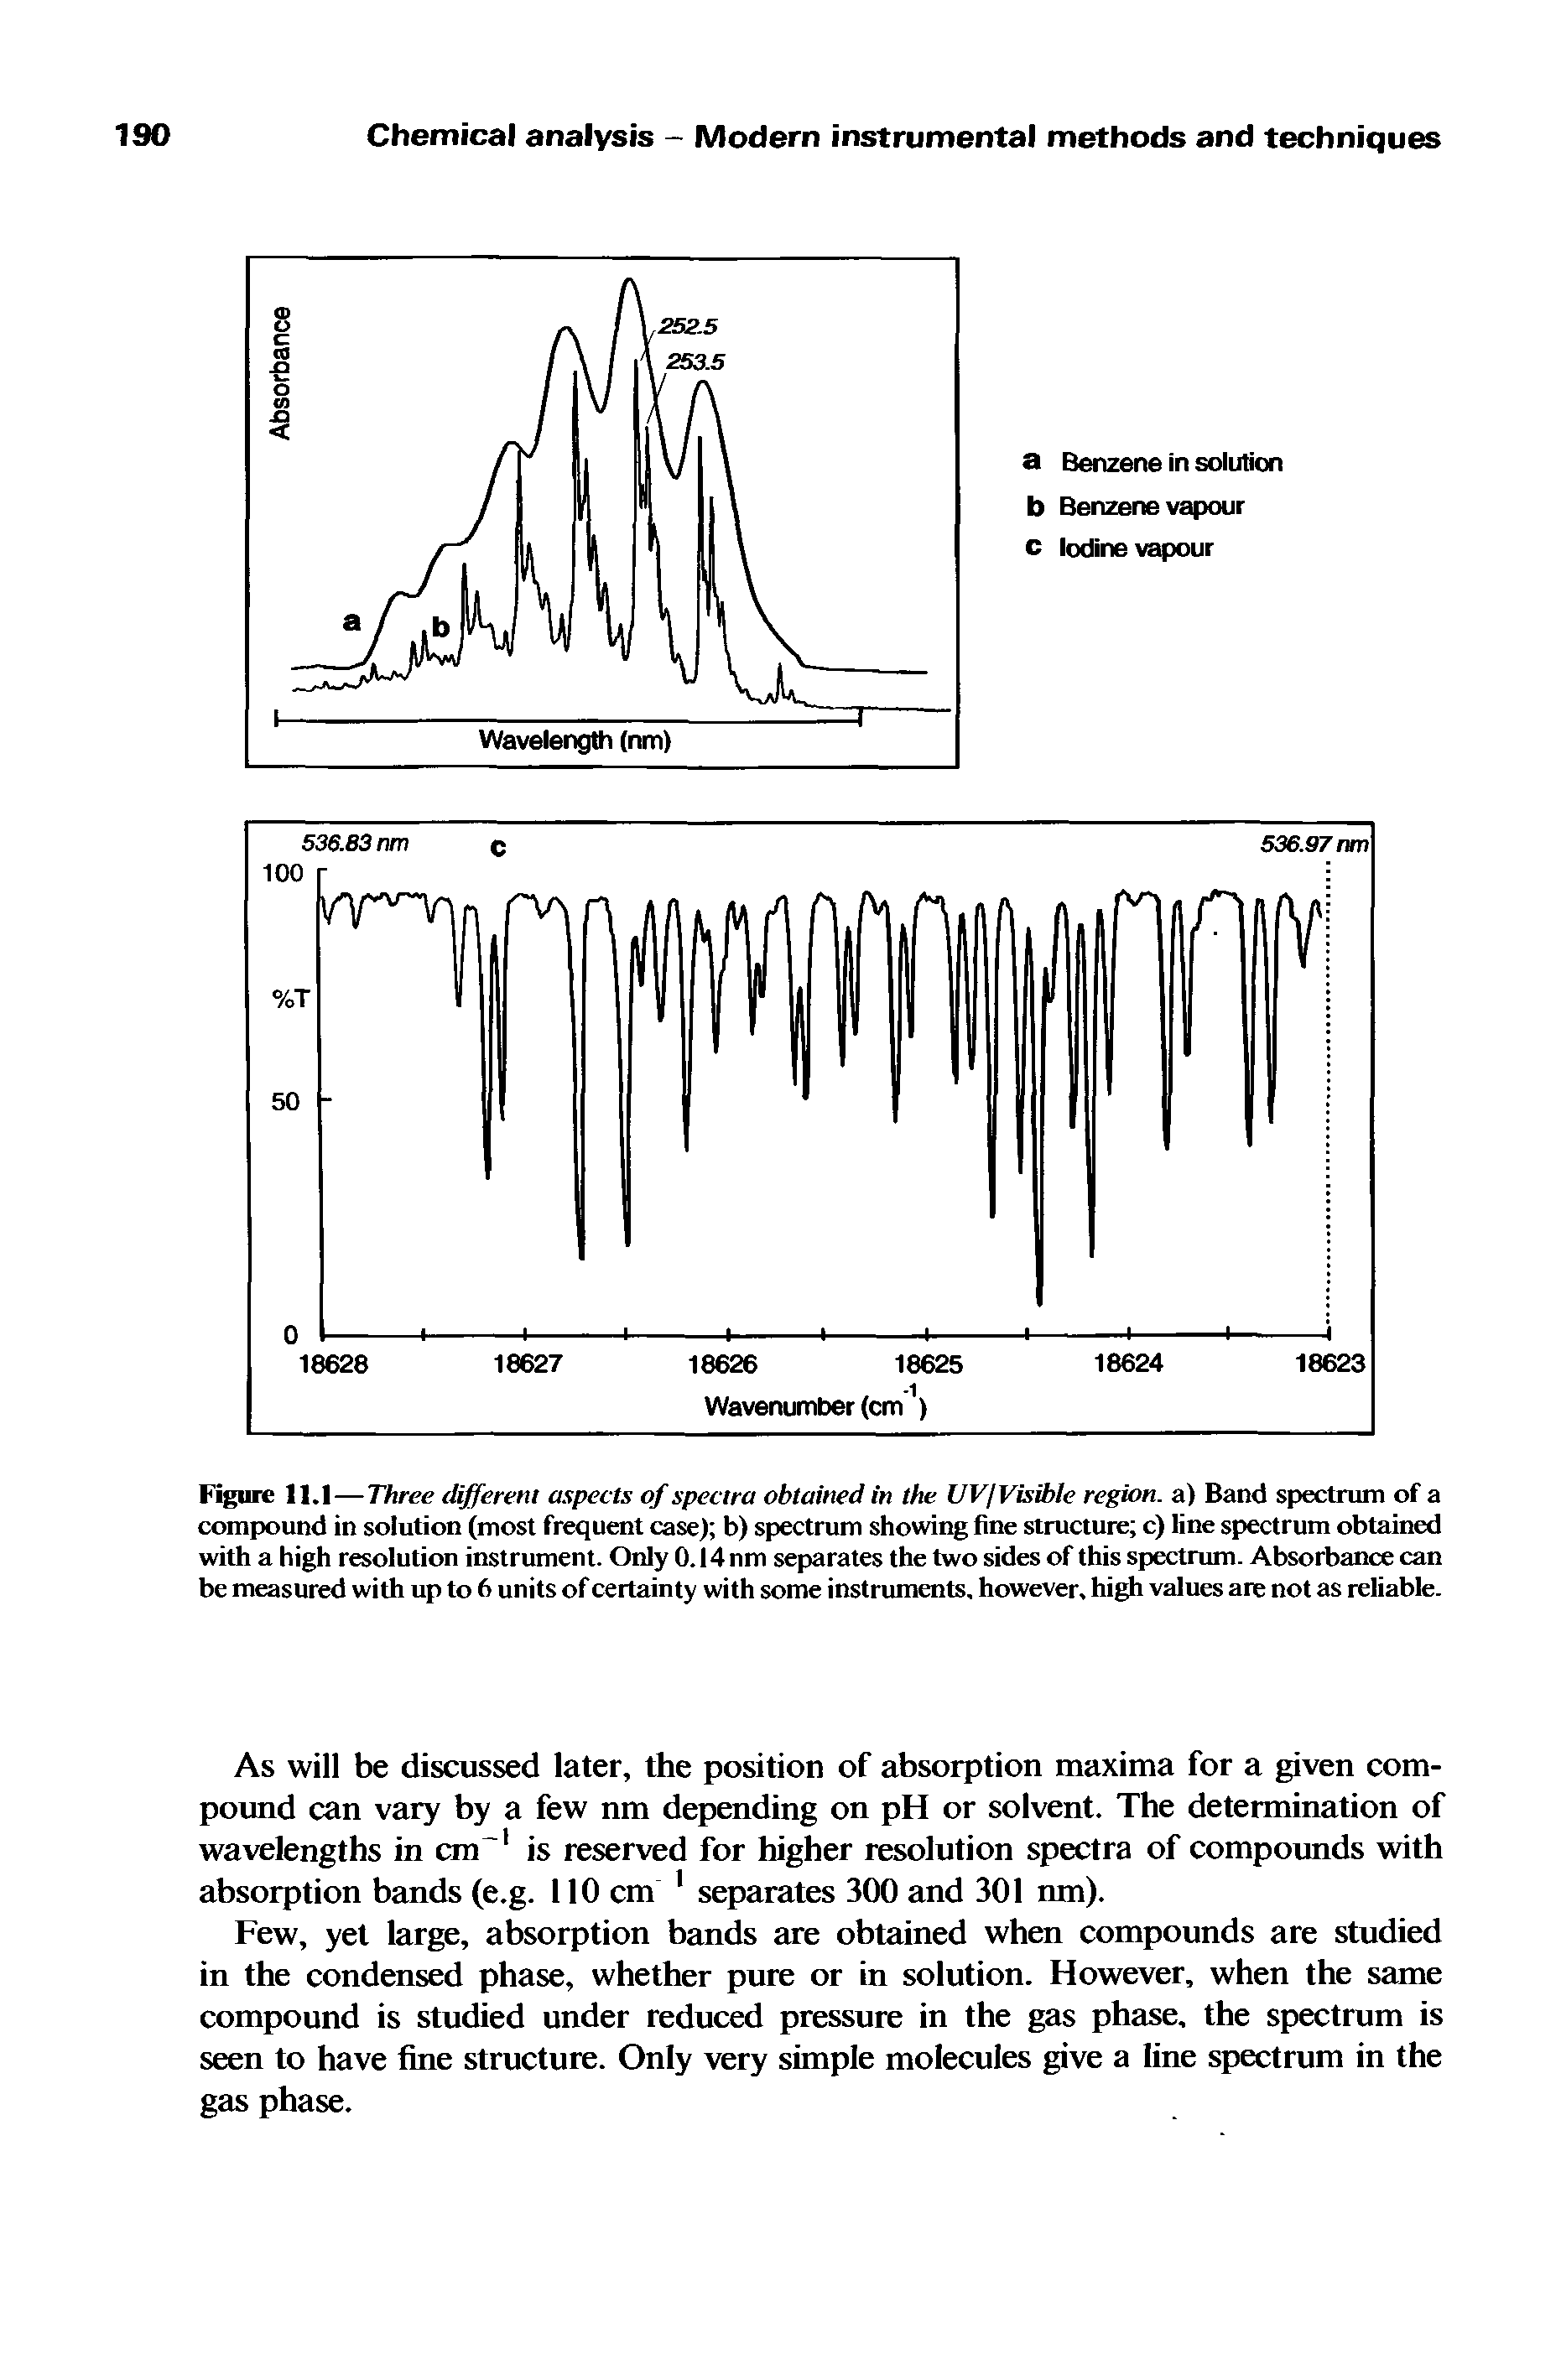 Figure 11.1—Three different aspects of spectra obtained in the UV/ Visible region, a) Band spectrum of a compound in solution (most frequent case) b) spectrum showing fine structure c) line spectrum obtained with a high resolution instrument. Only 0.14 nm separates the two sides of this spectrum. Absorbance can be measured with up to 6 units of certainty with some instruments, however, high values are not as reliable.